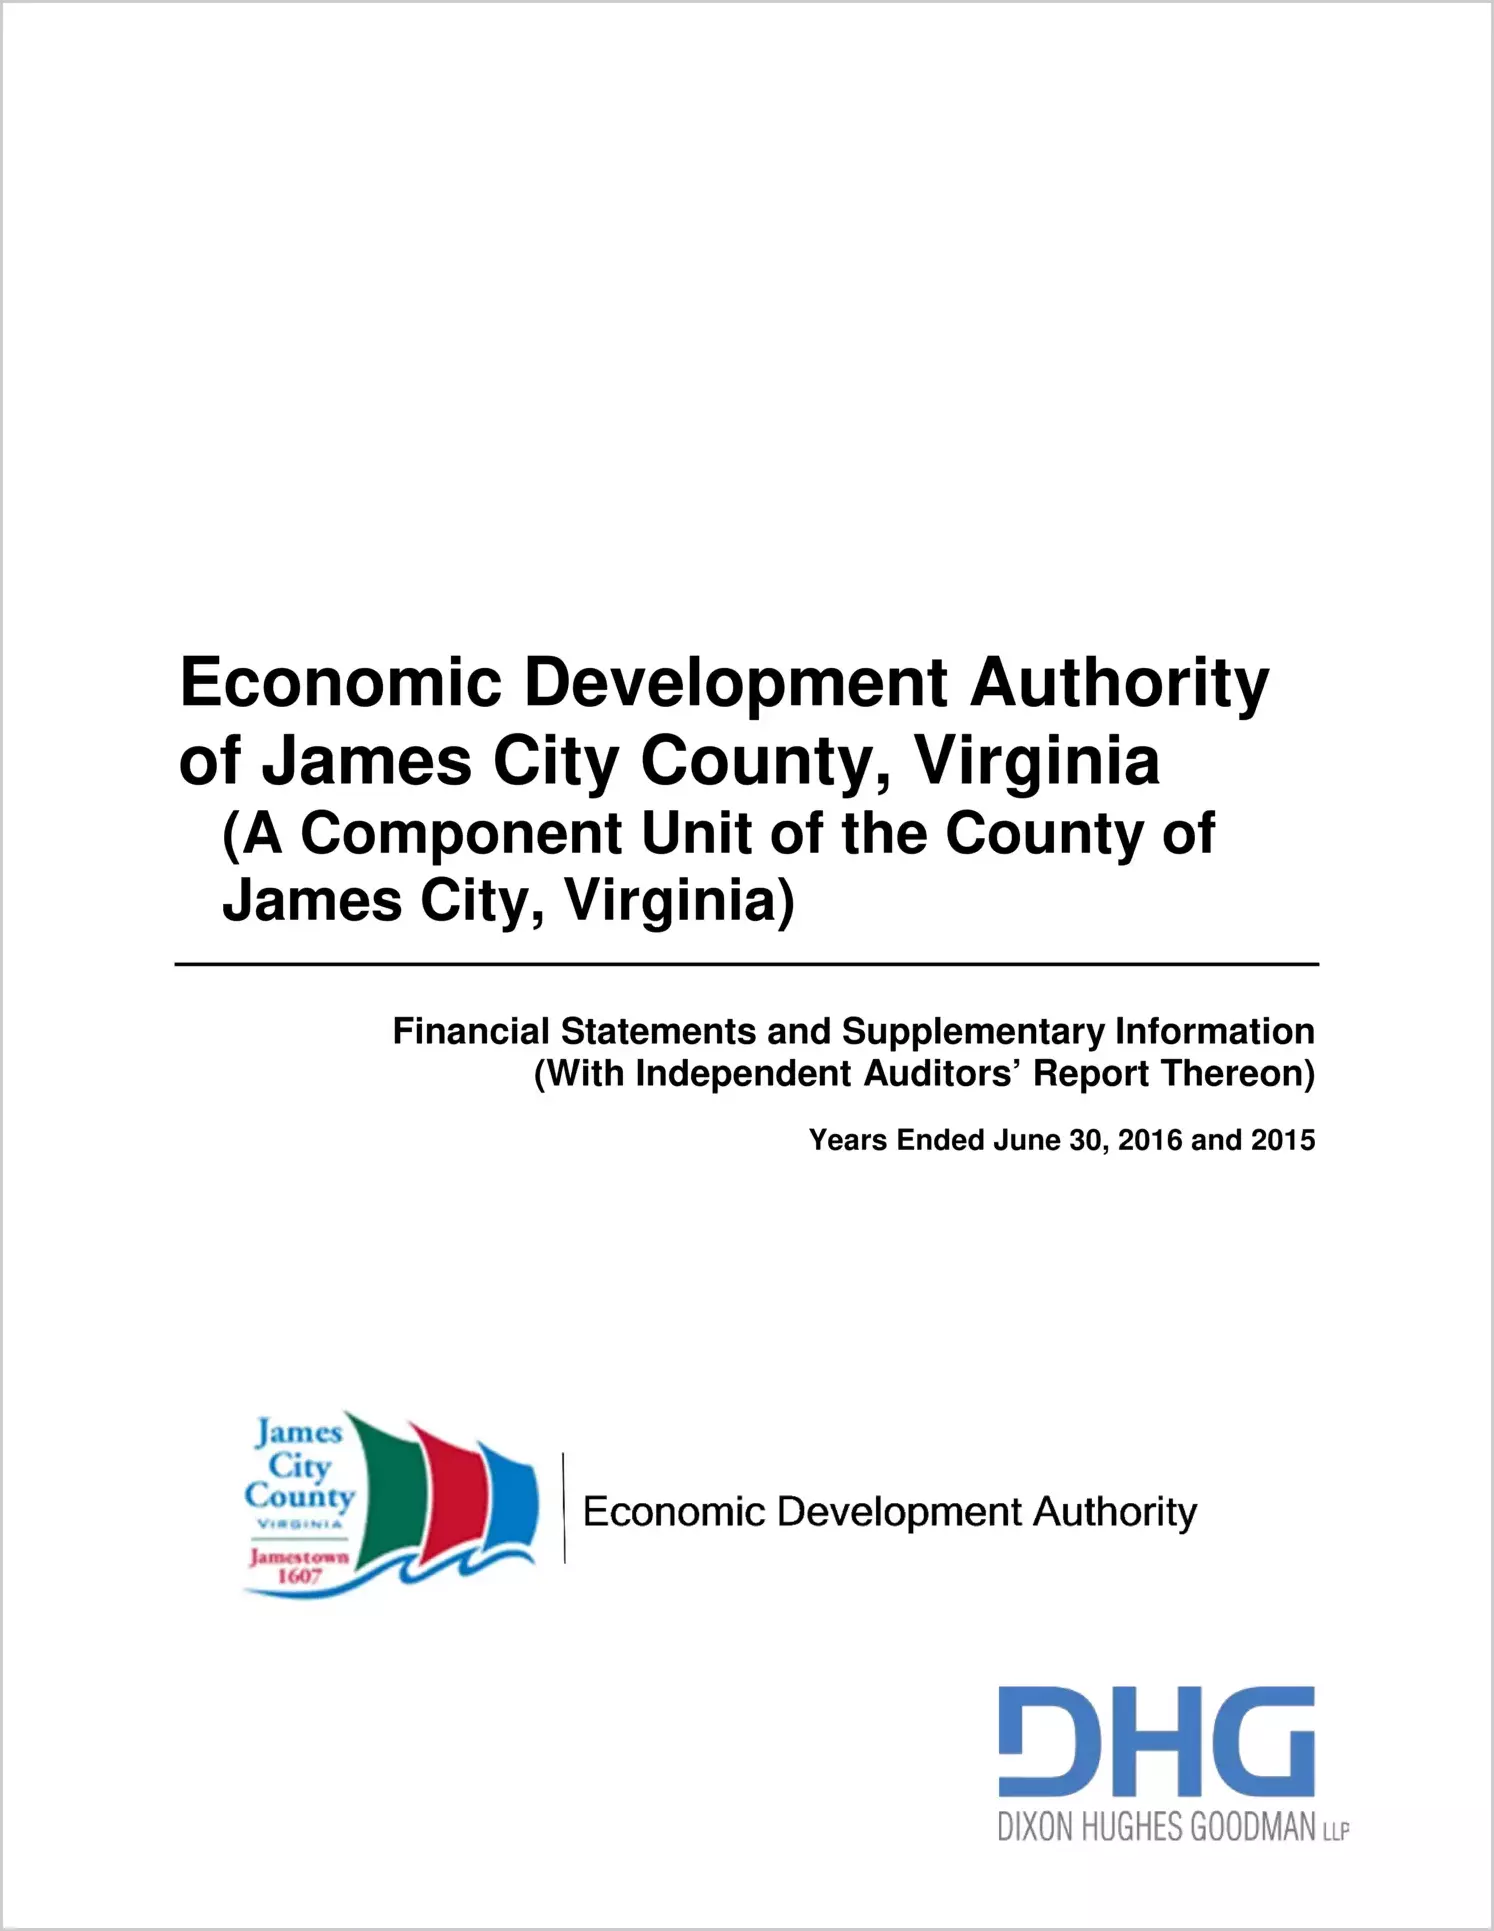 2016 ABC/Other Annual Financial Report  for James City County Economic Development Authority